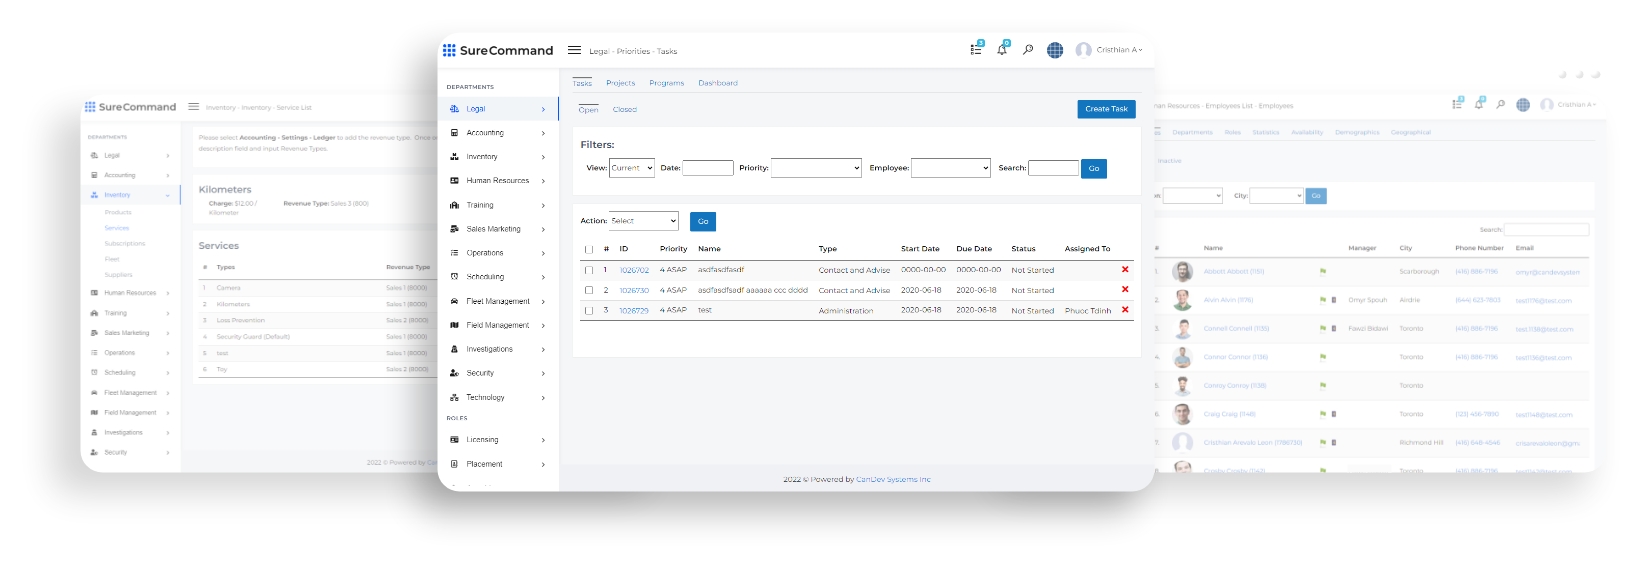 Dashboard and internal view of SureCommand ERP management system portal